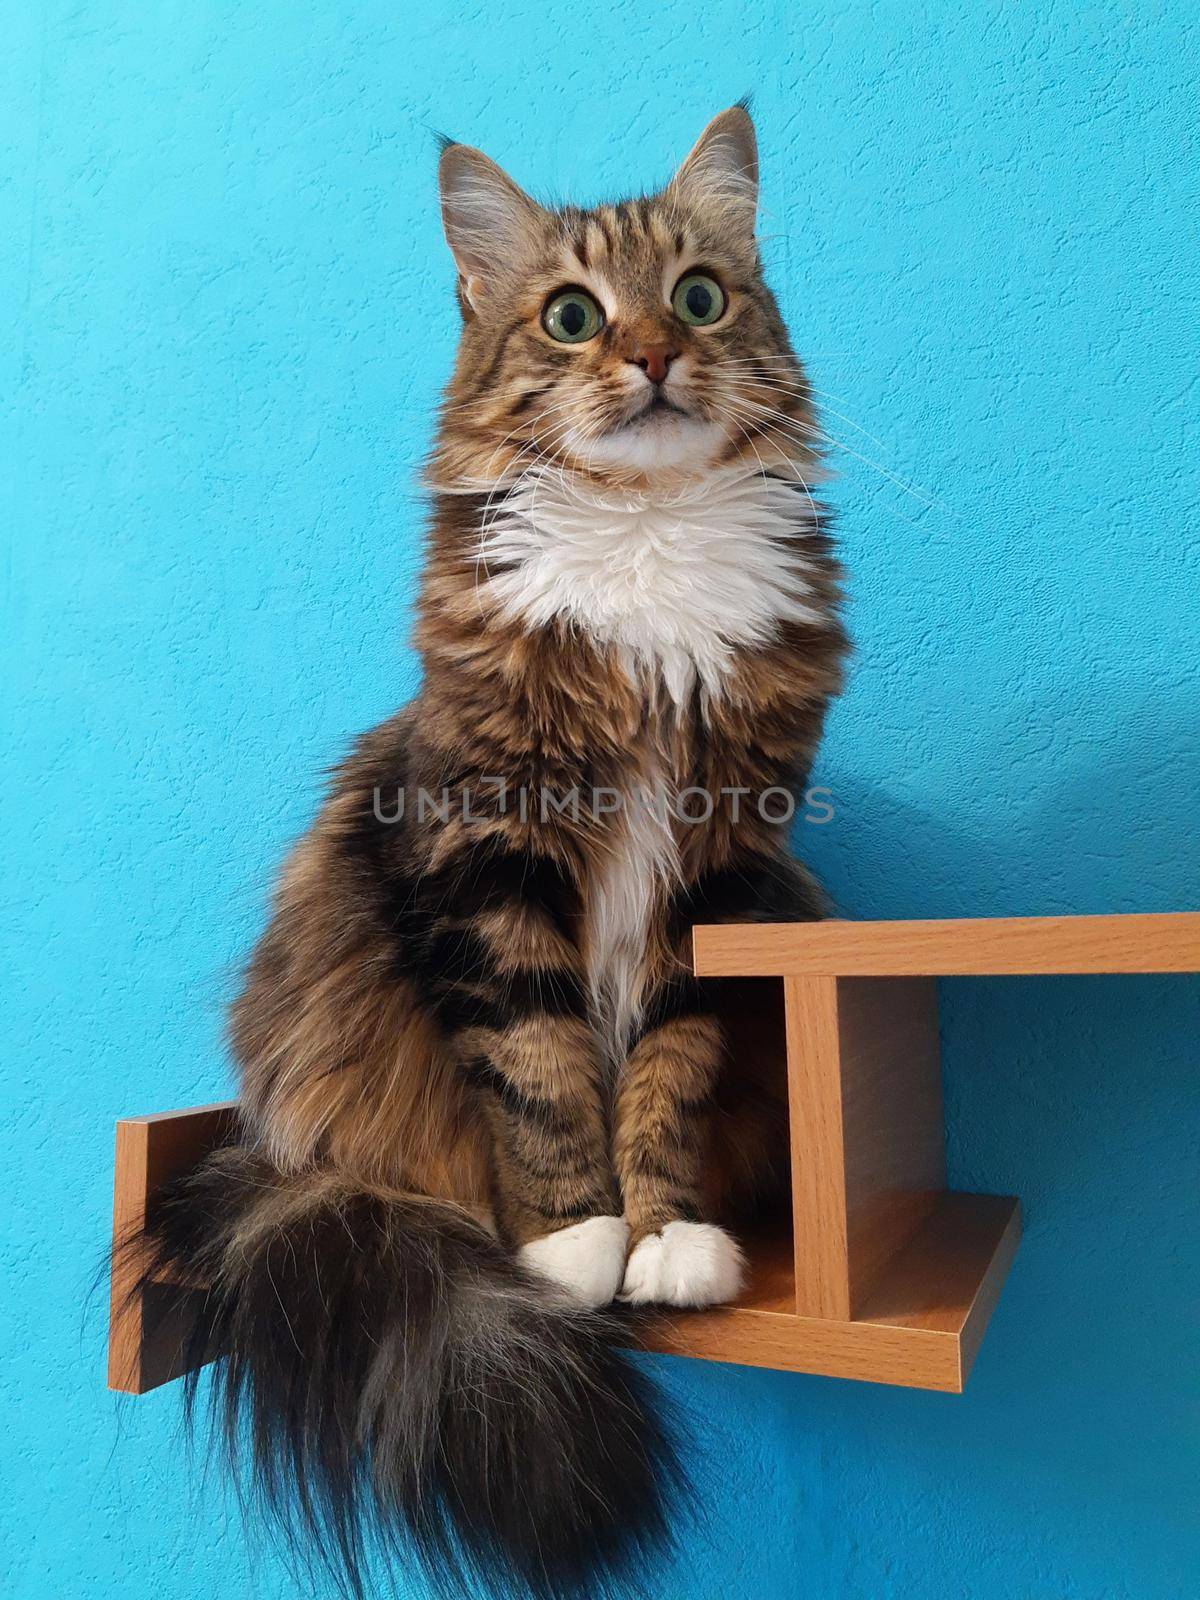 A beautiful cat with green eyes sits on a bookshelf and looks ahead on a turquoise background.